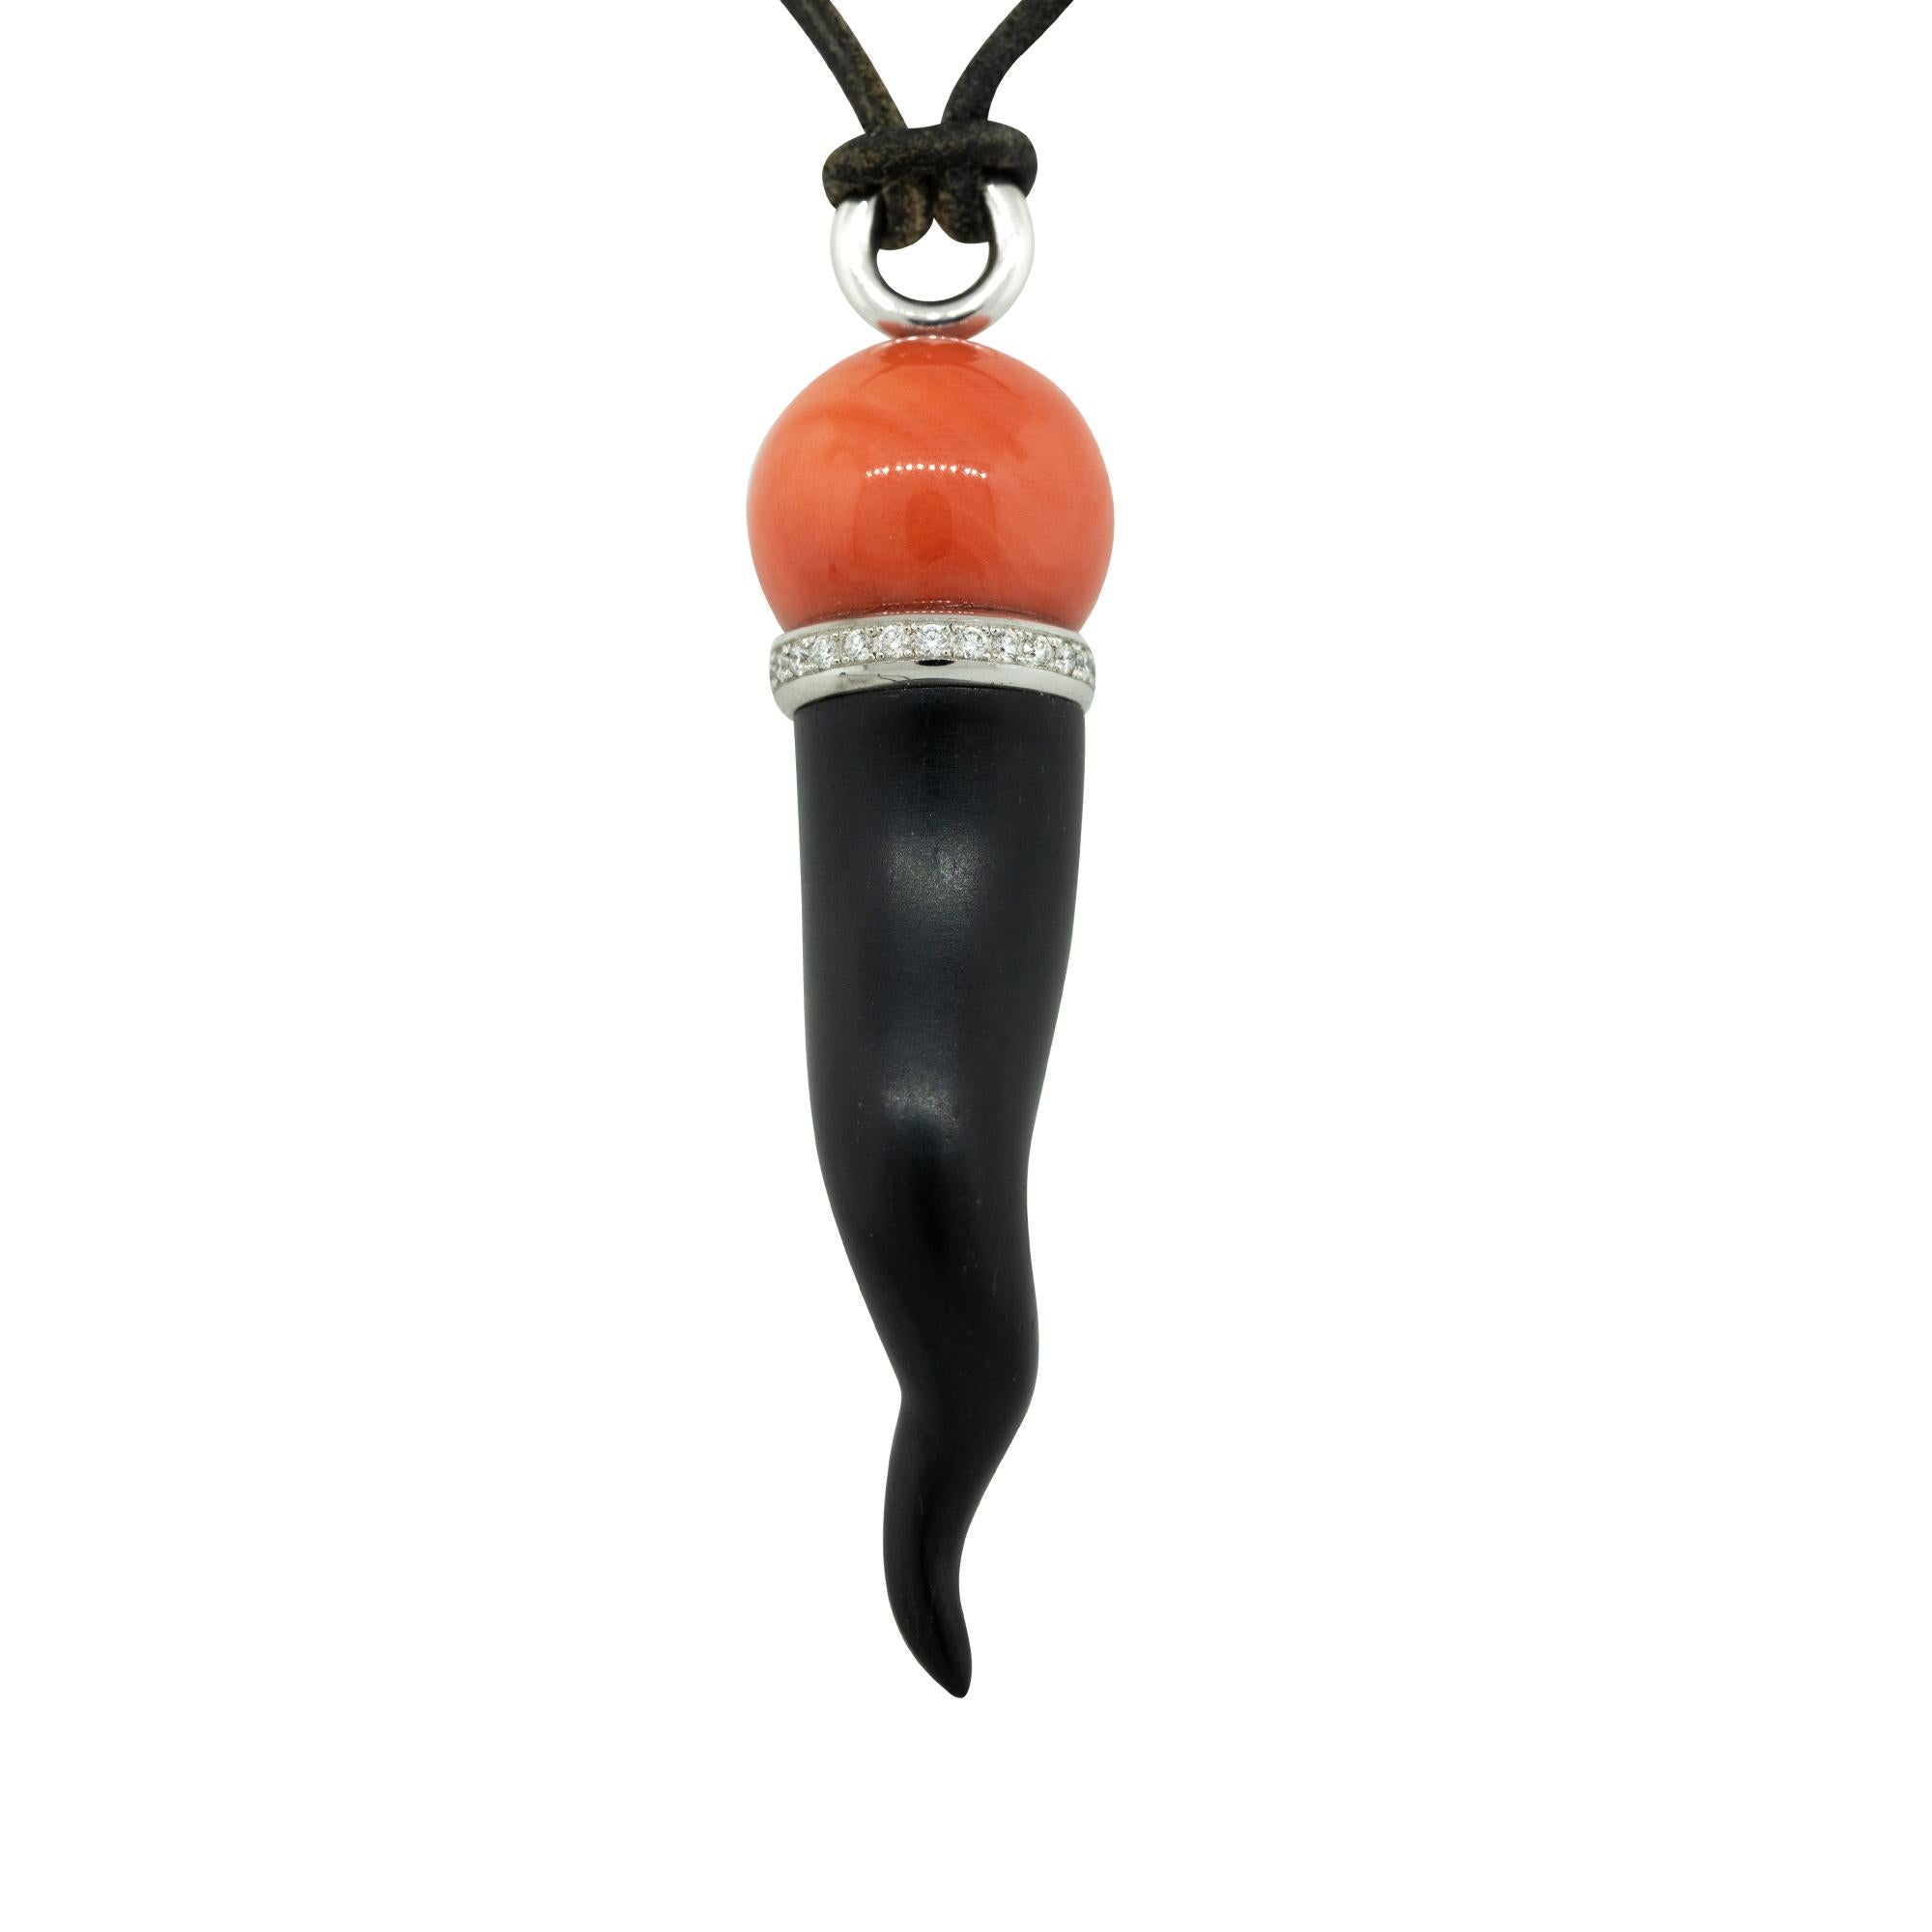 18k White Gold 0.36ctw Diamond, Coral, and Ebony Italian Horn Pendant Necklace
Material: 18k White Gold
Pendant Details: This pendant has an Ebony horn with a Red Coral Bead on top. There are approximately 0.36ctw of Round Brilliant cut